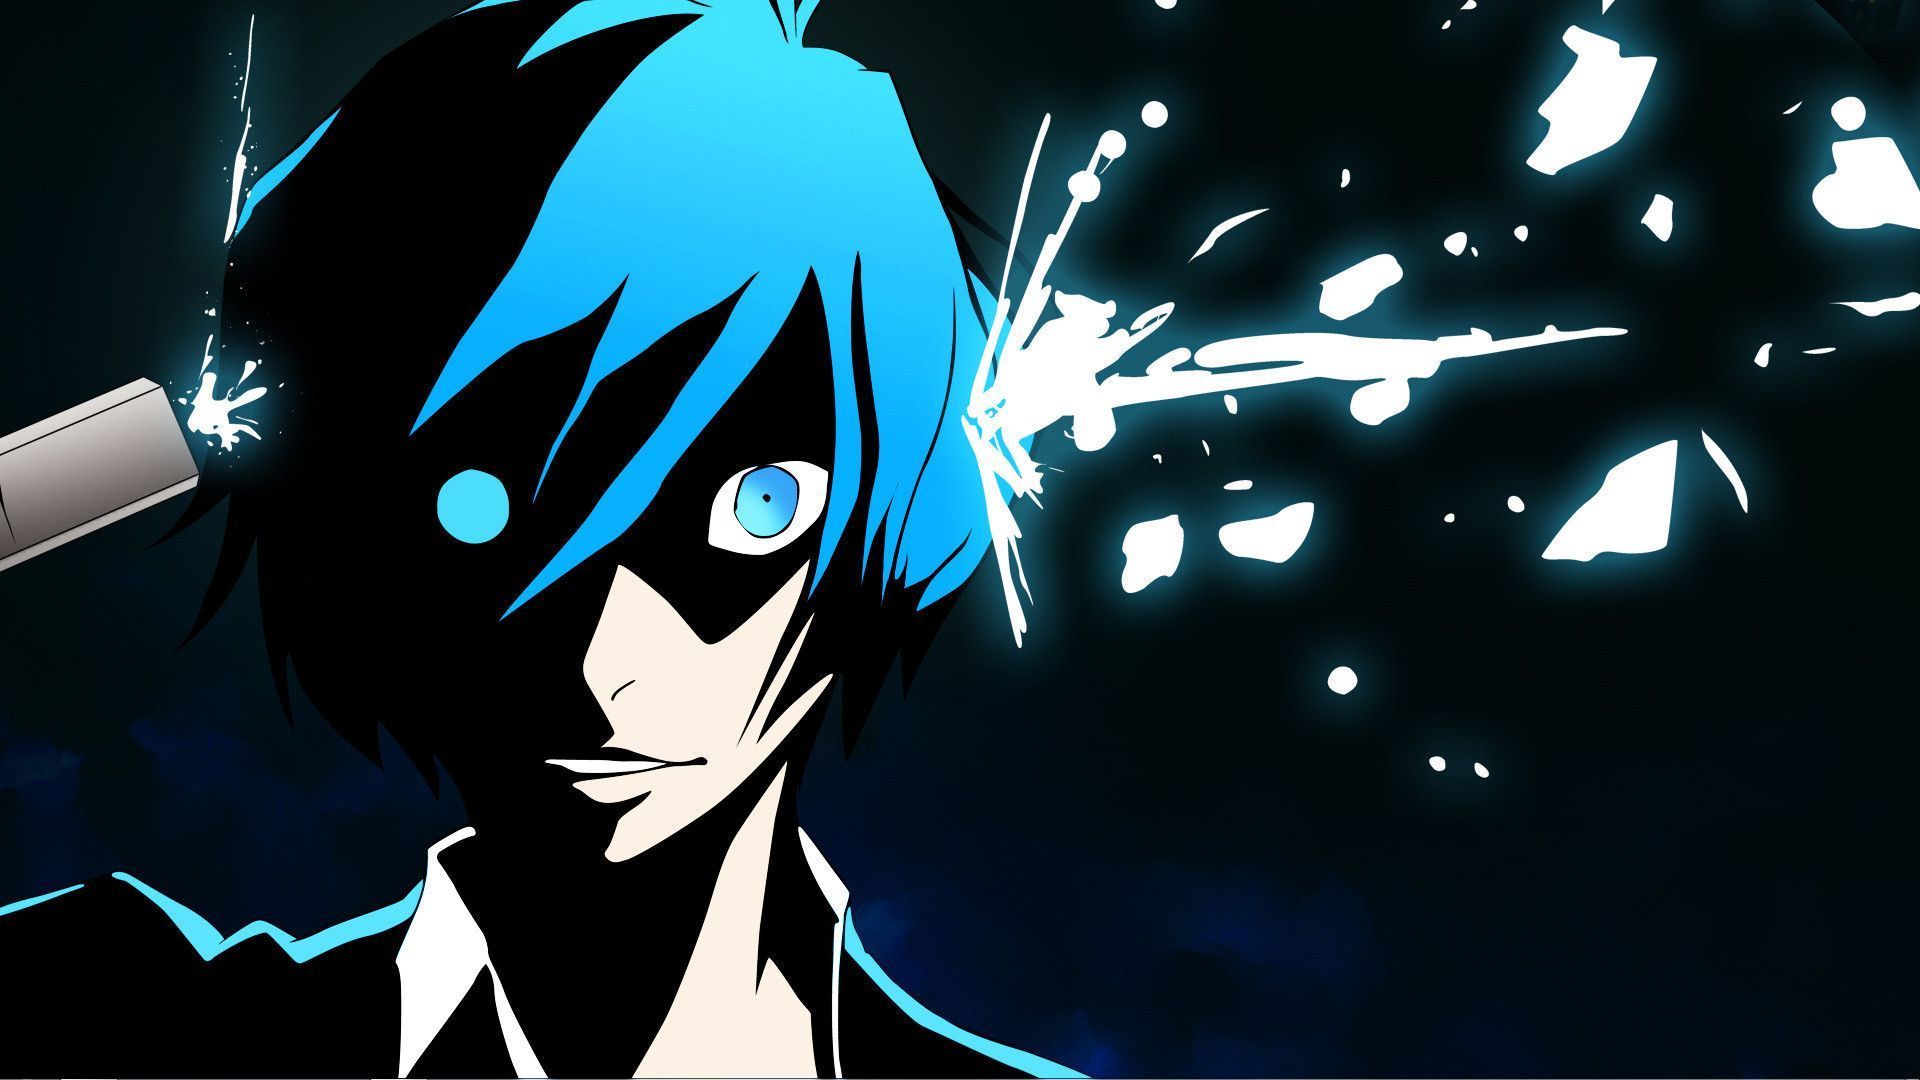 Persona 3 Fes Wallpapers HD 1920x1080